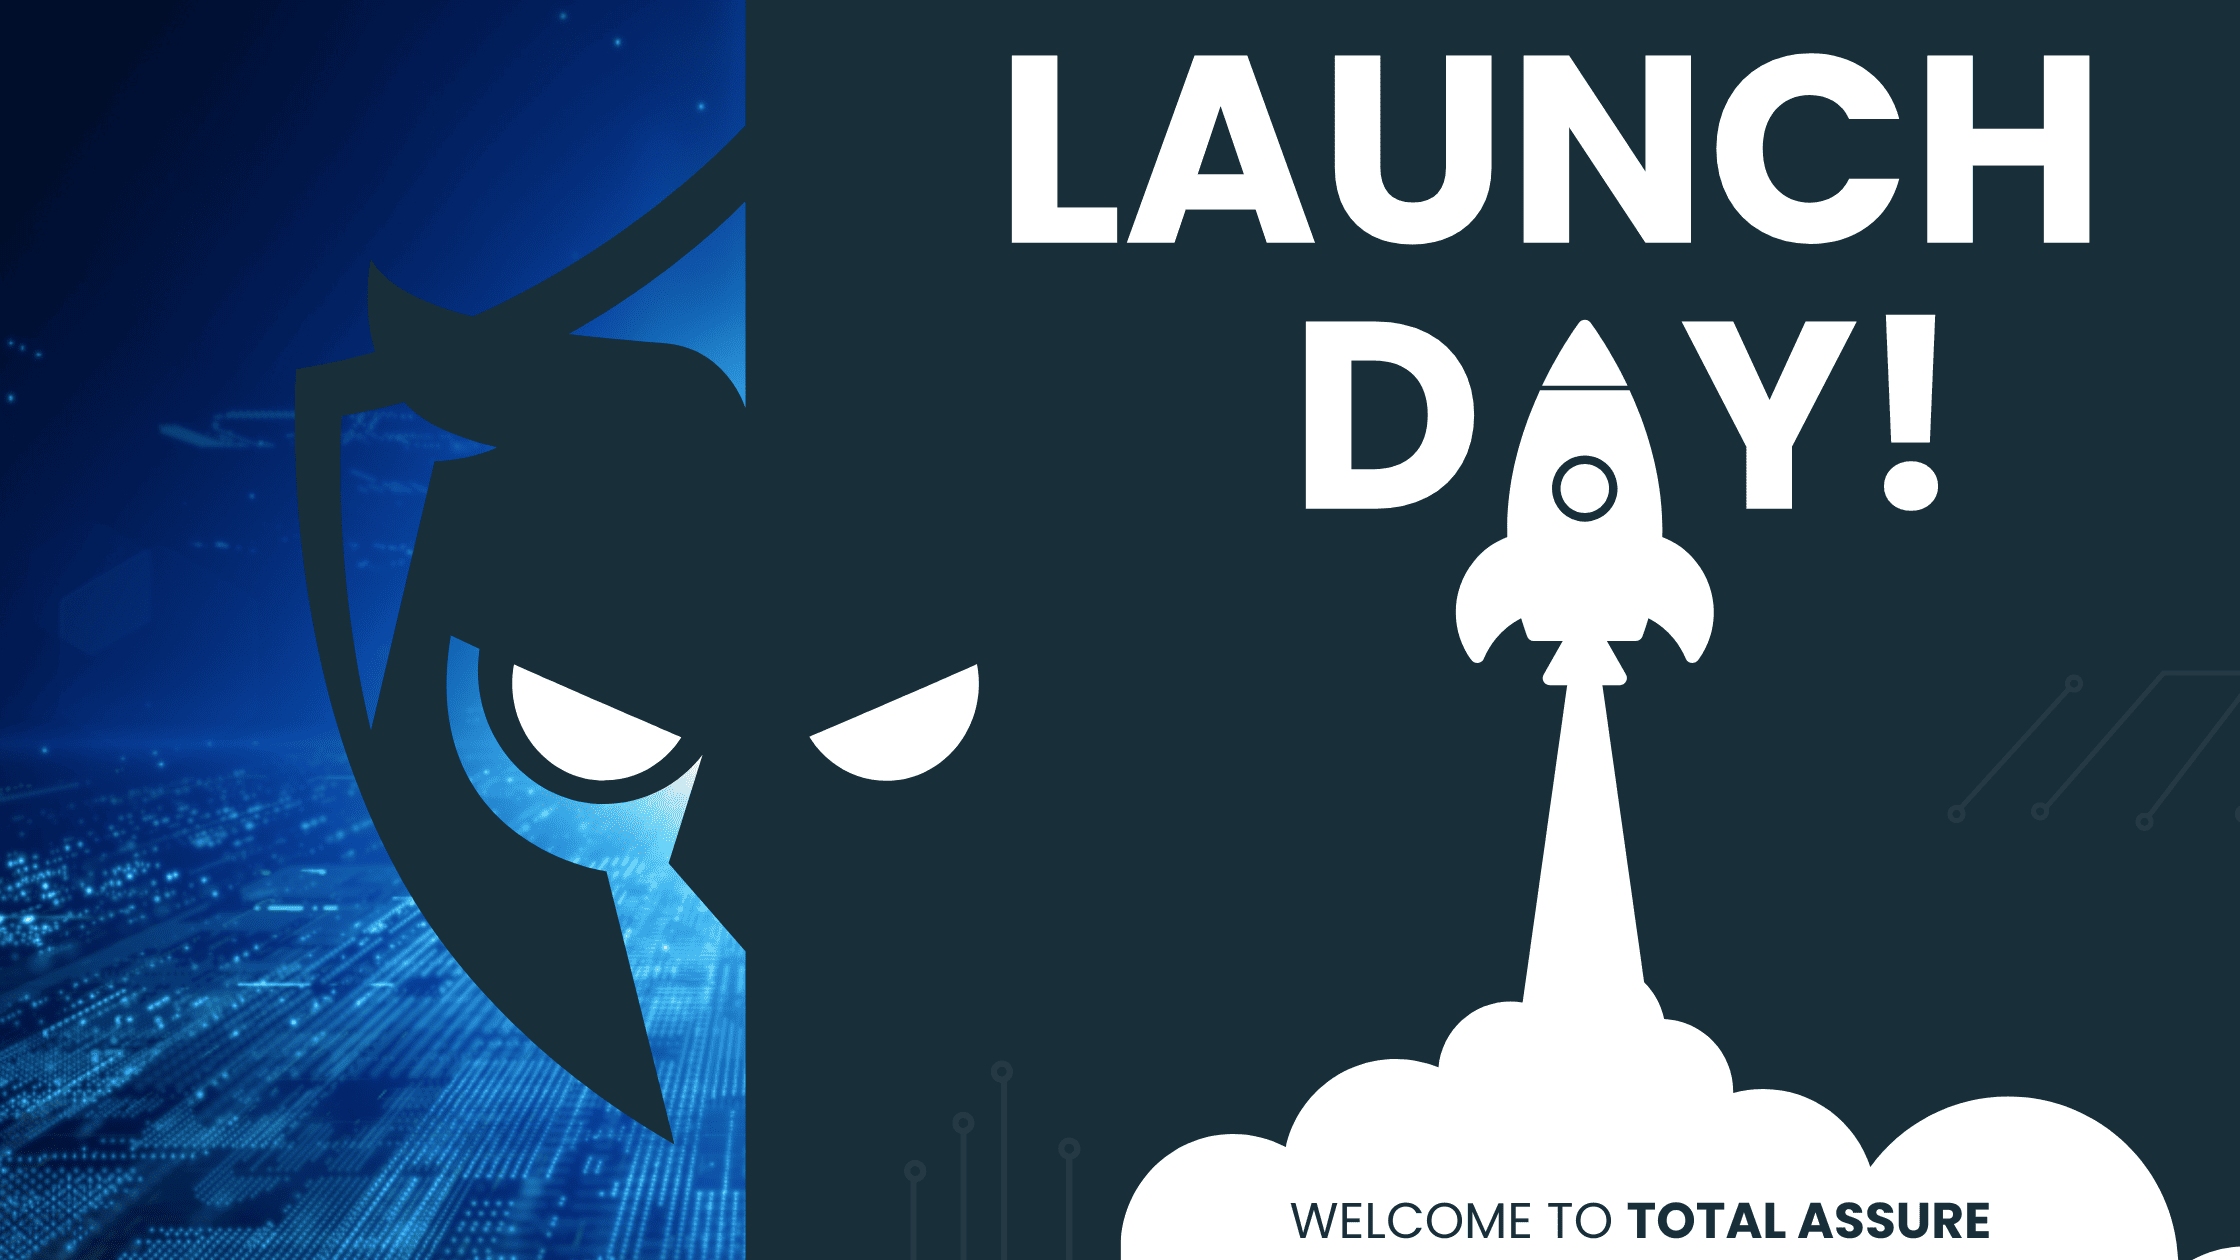 launch day image of rocket